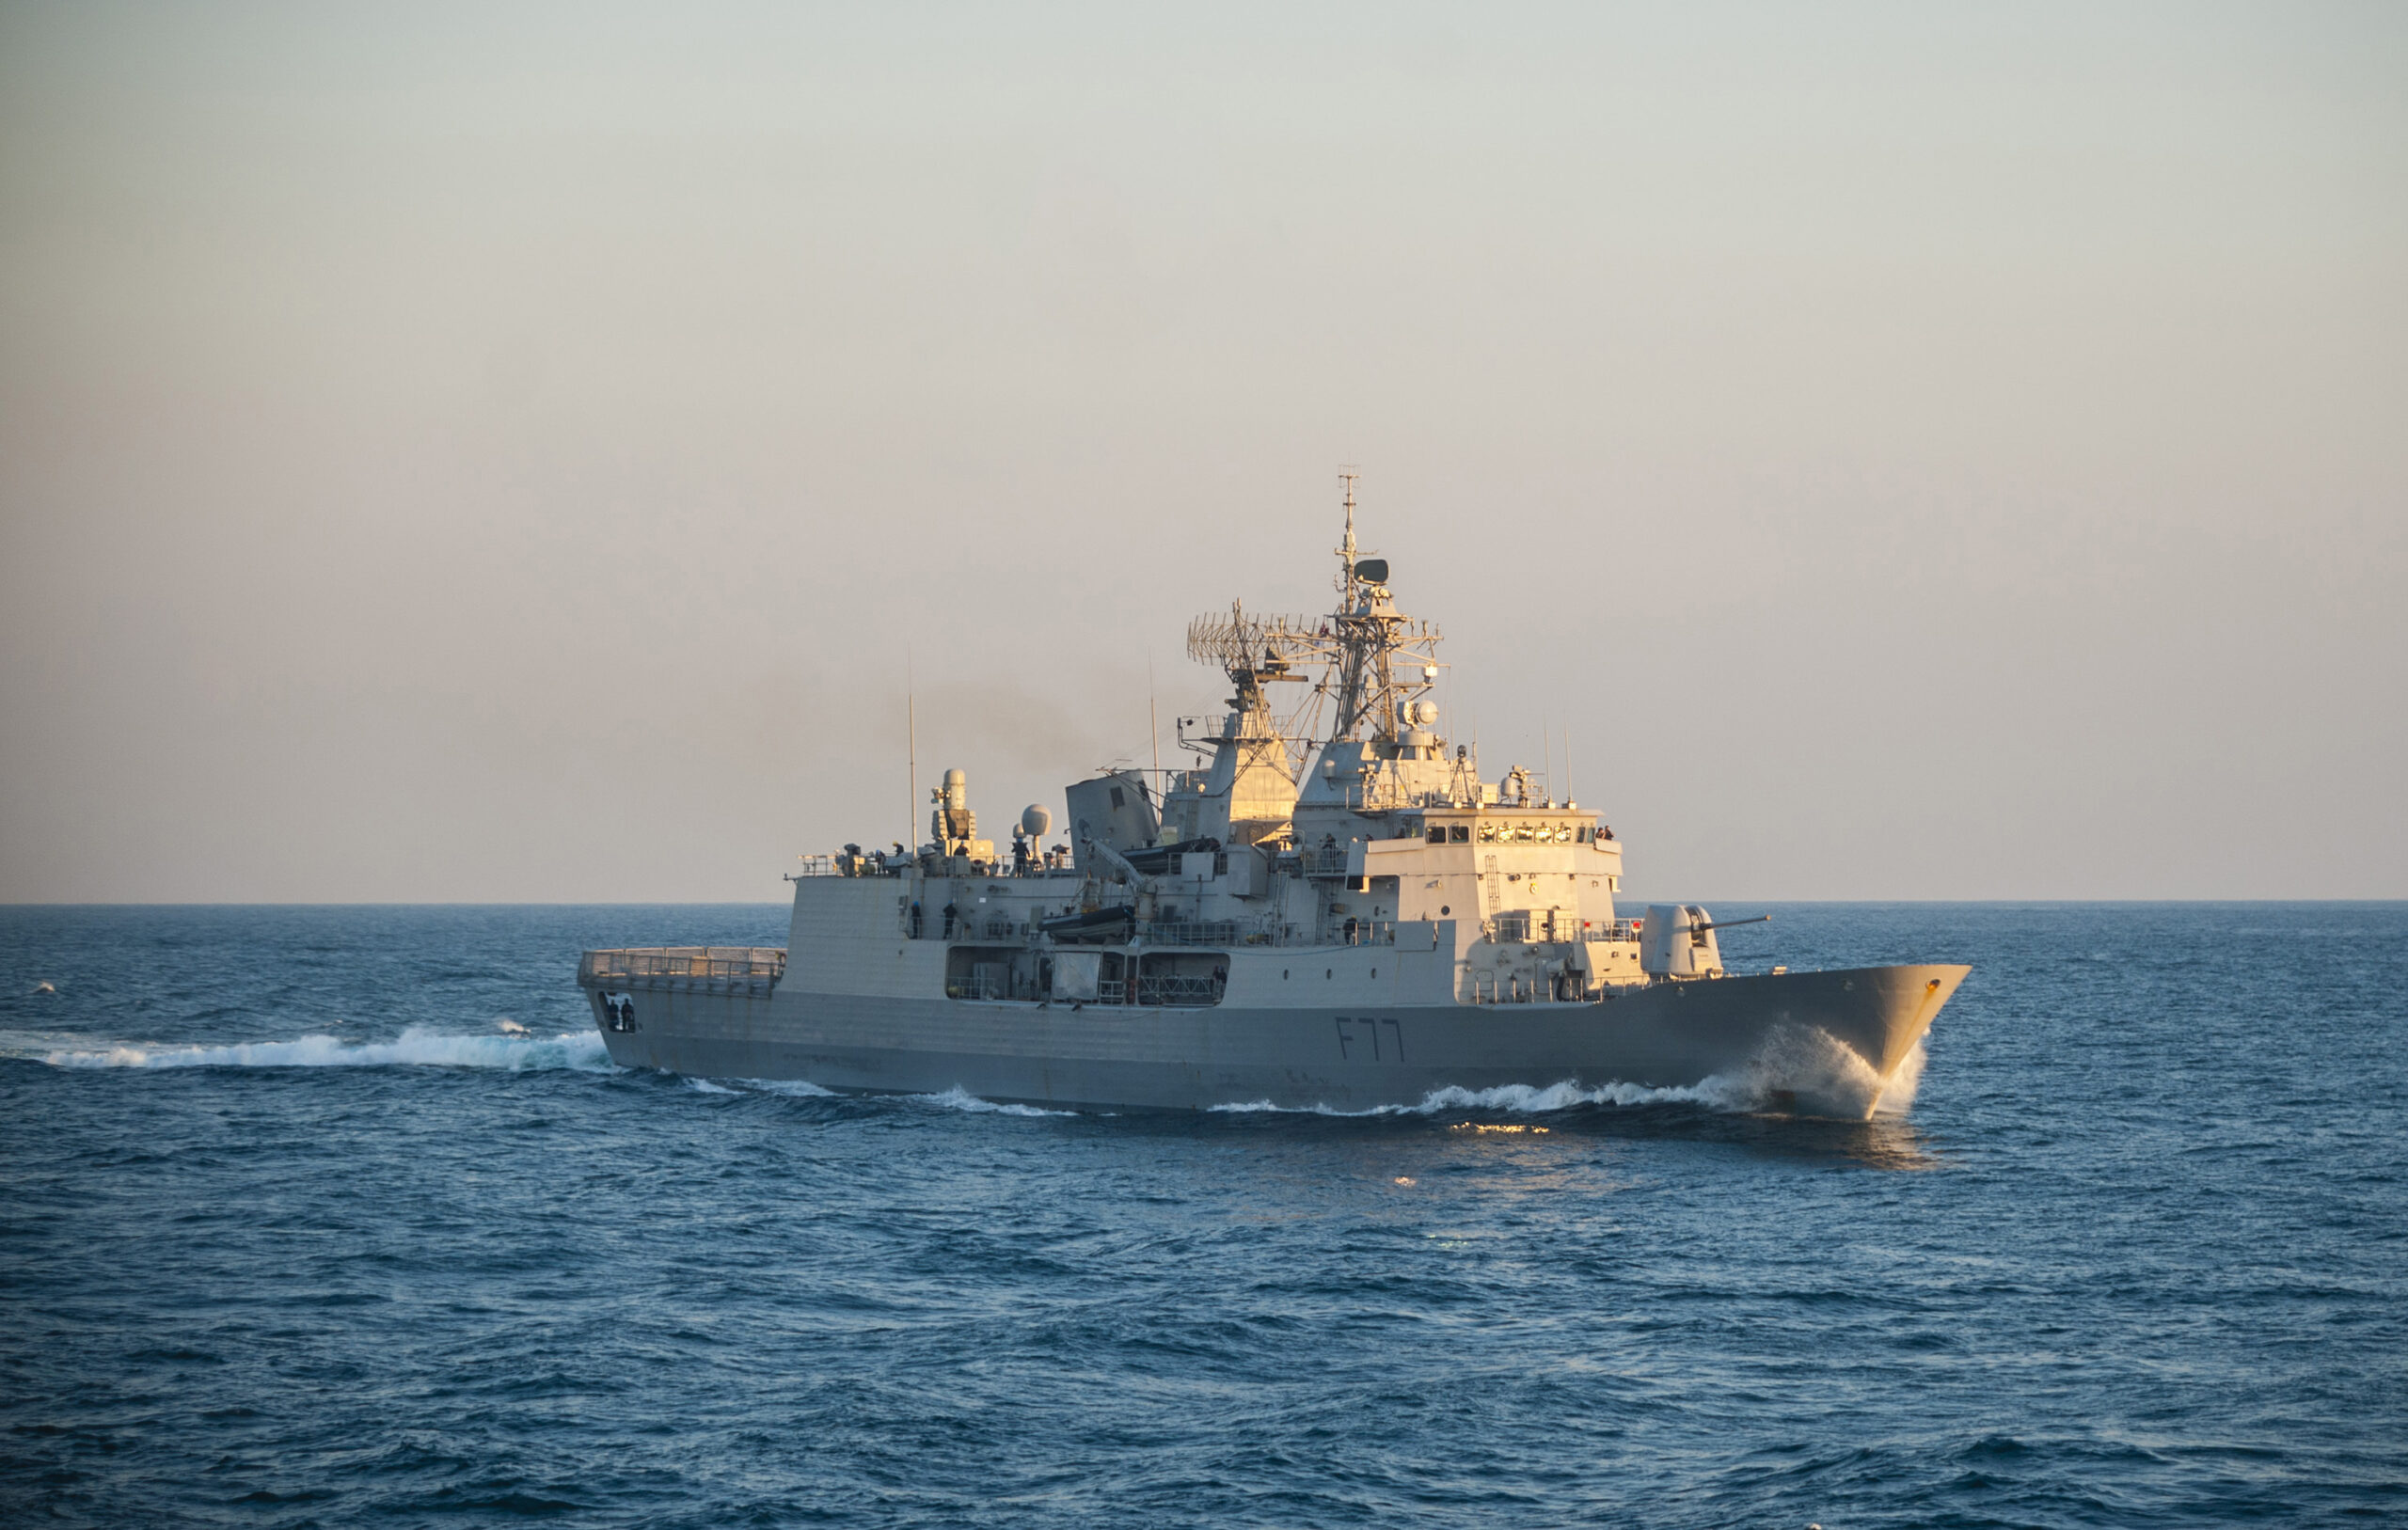 150711-N-BX824-070 TIMOR SEA (July 11, 2015) The Royal New Zealand Navy Anzac-class frigate HMNZS Te Kaha (F77) operates in the Timor Sea in support of Talisman Sabre (TS) 2015. TS 15 is a biennial exercise that provides an invaluable opportunity for nearly 30,000 U.S. and Australian defense forces to conduct operations in a combined, joint and interagency environment that will increase both countries' ability to plan and execute a full range of operations from combat missions to humanitarian assistance efforts. (U.S. Navy photo by Mass Communication Specialist 3rd Class Ricardo R. Guzman/Released)